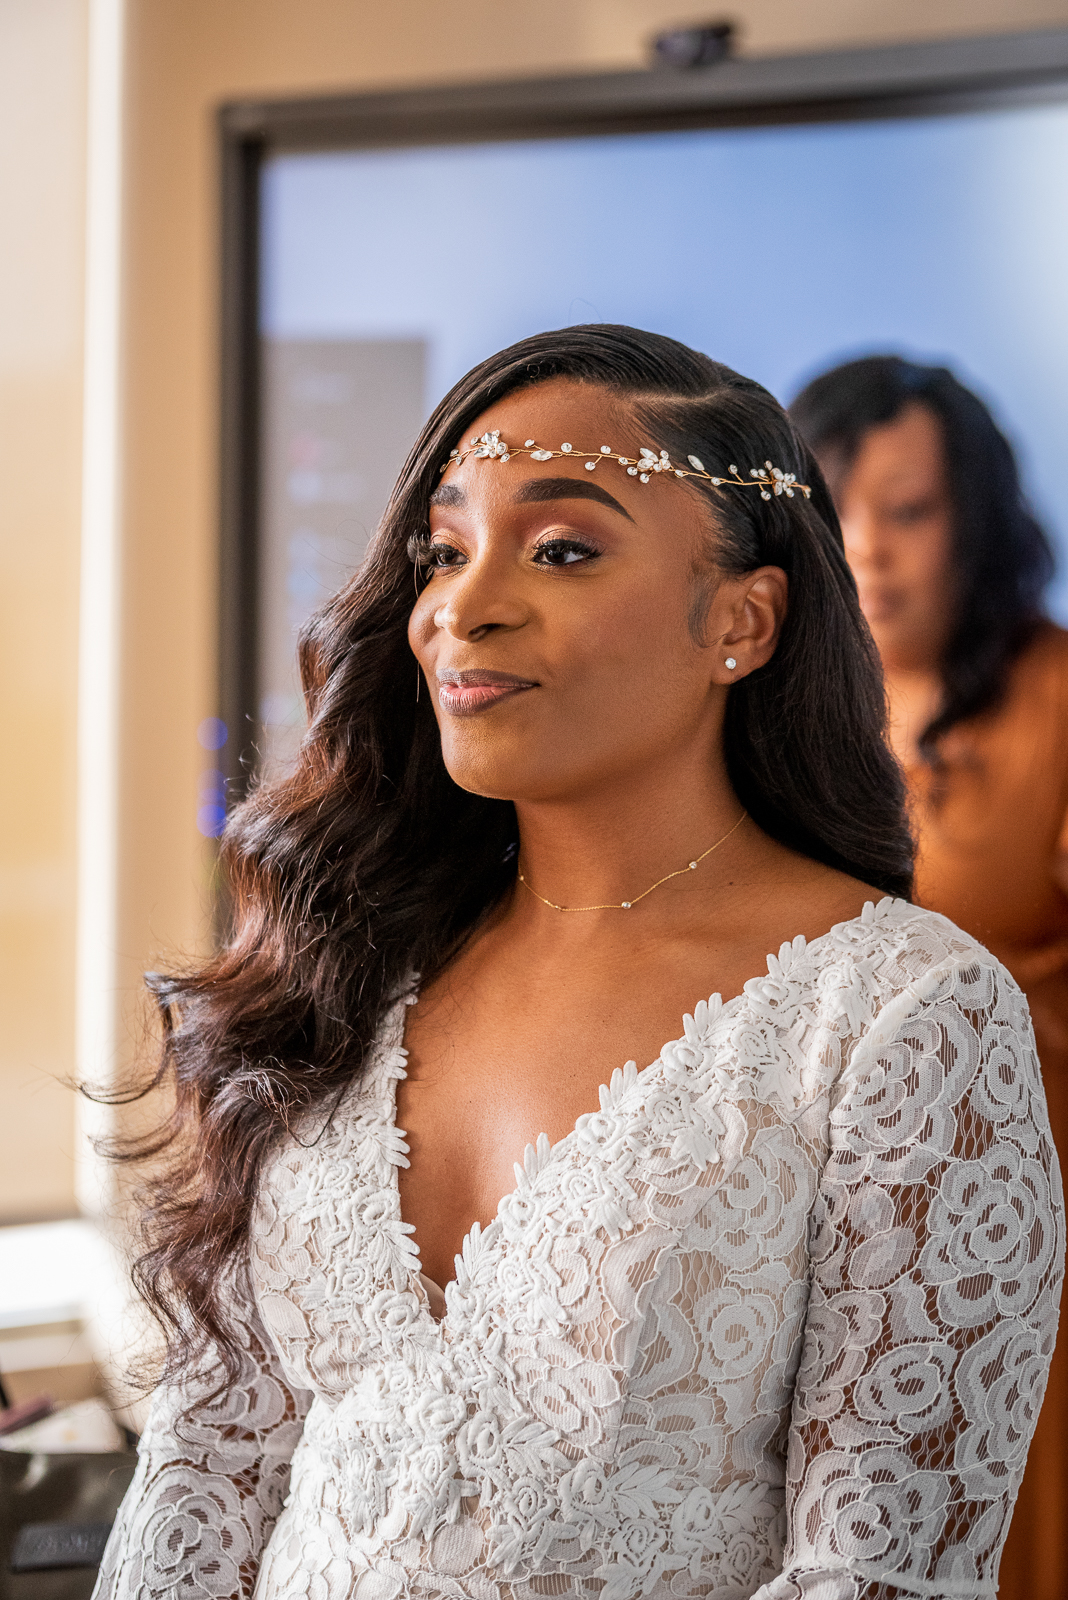 Bride getting ready, hair and makeup, jewelry, wedding preparation, wedding dress, bridal portrait, beautiful African American bride, African American wedding, classic, urban wedding ceremony at Penthouse Events, Ohio City, Cleveland Flats